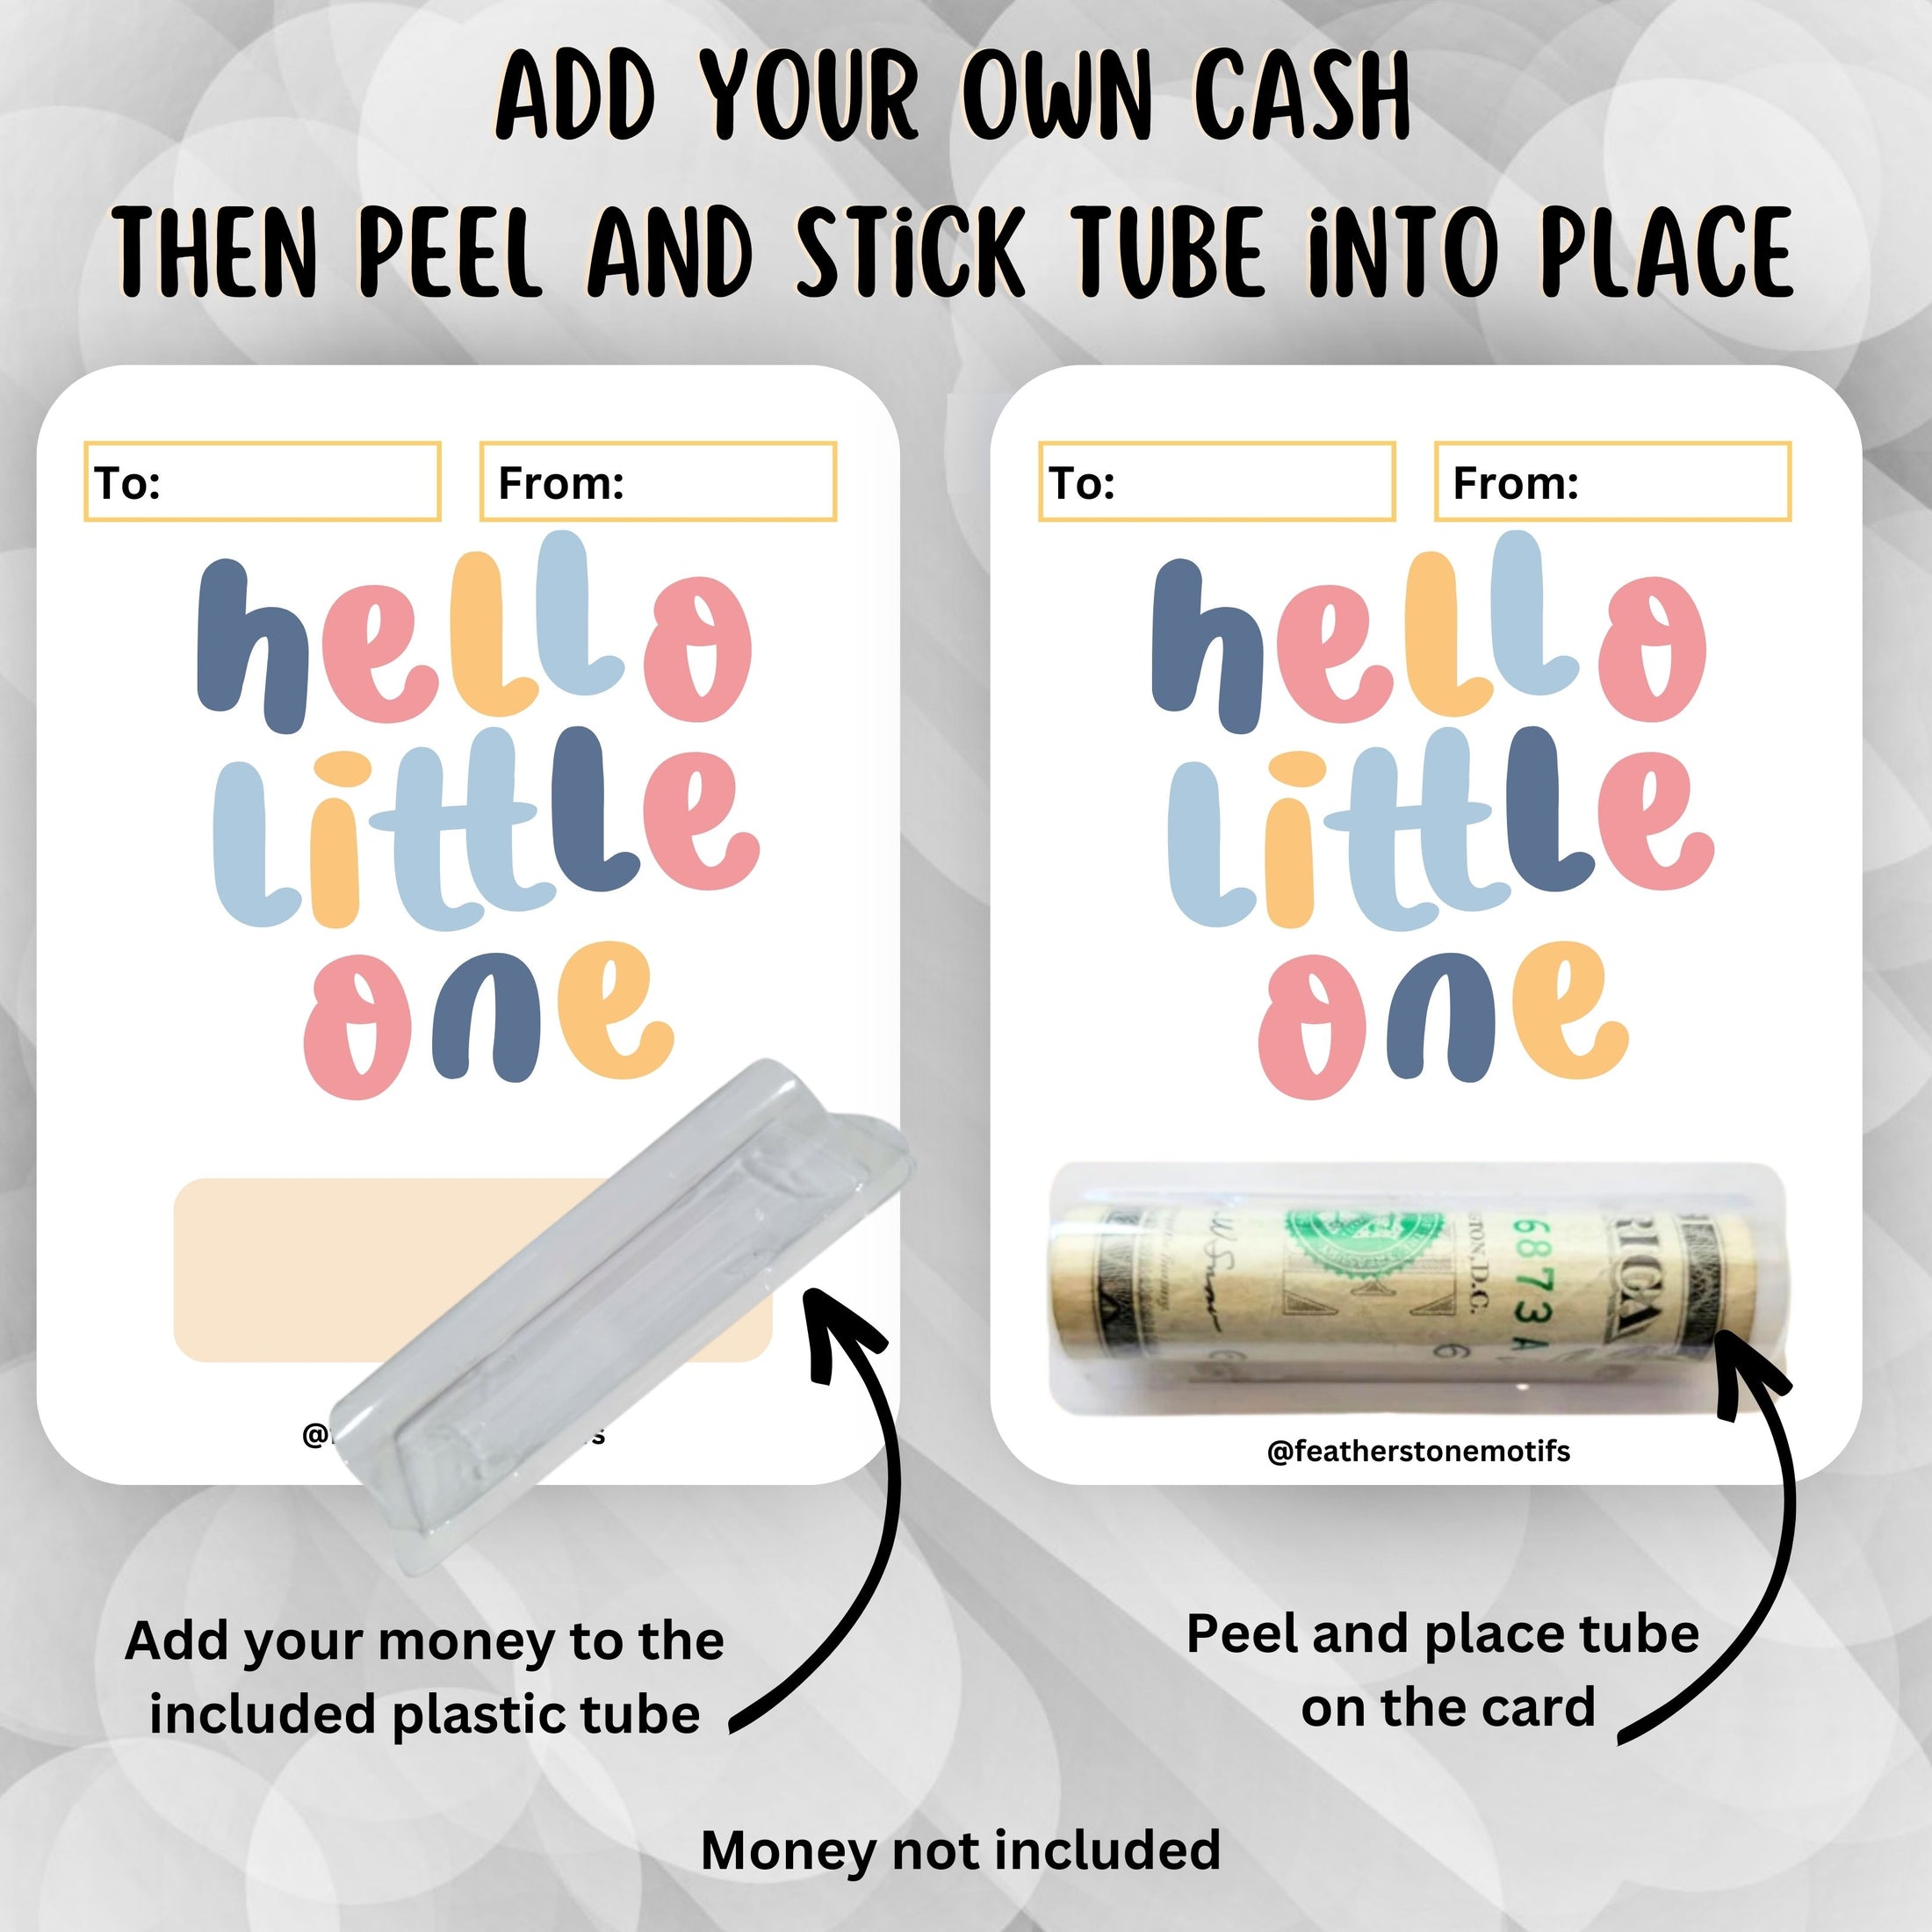 This image show how to attach the money tube to the Hello Little One Money Card.